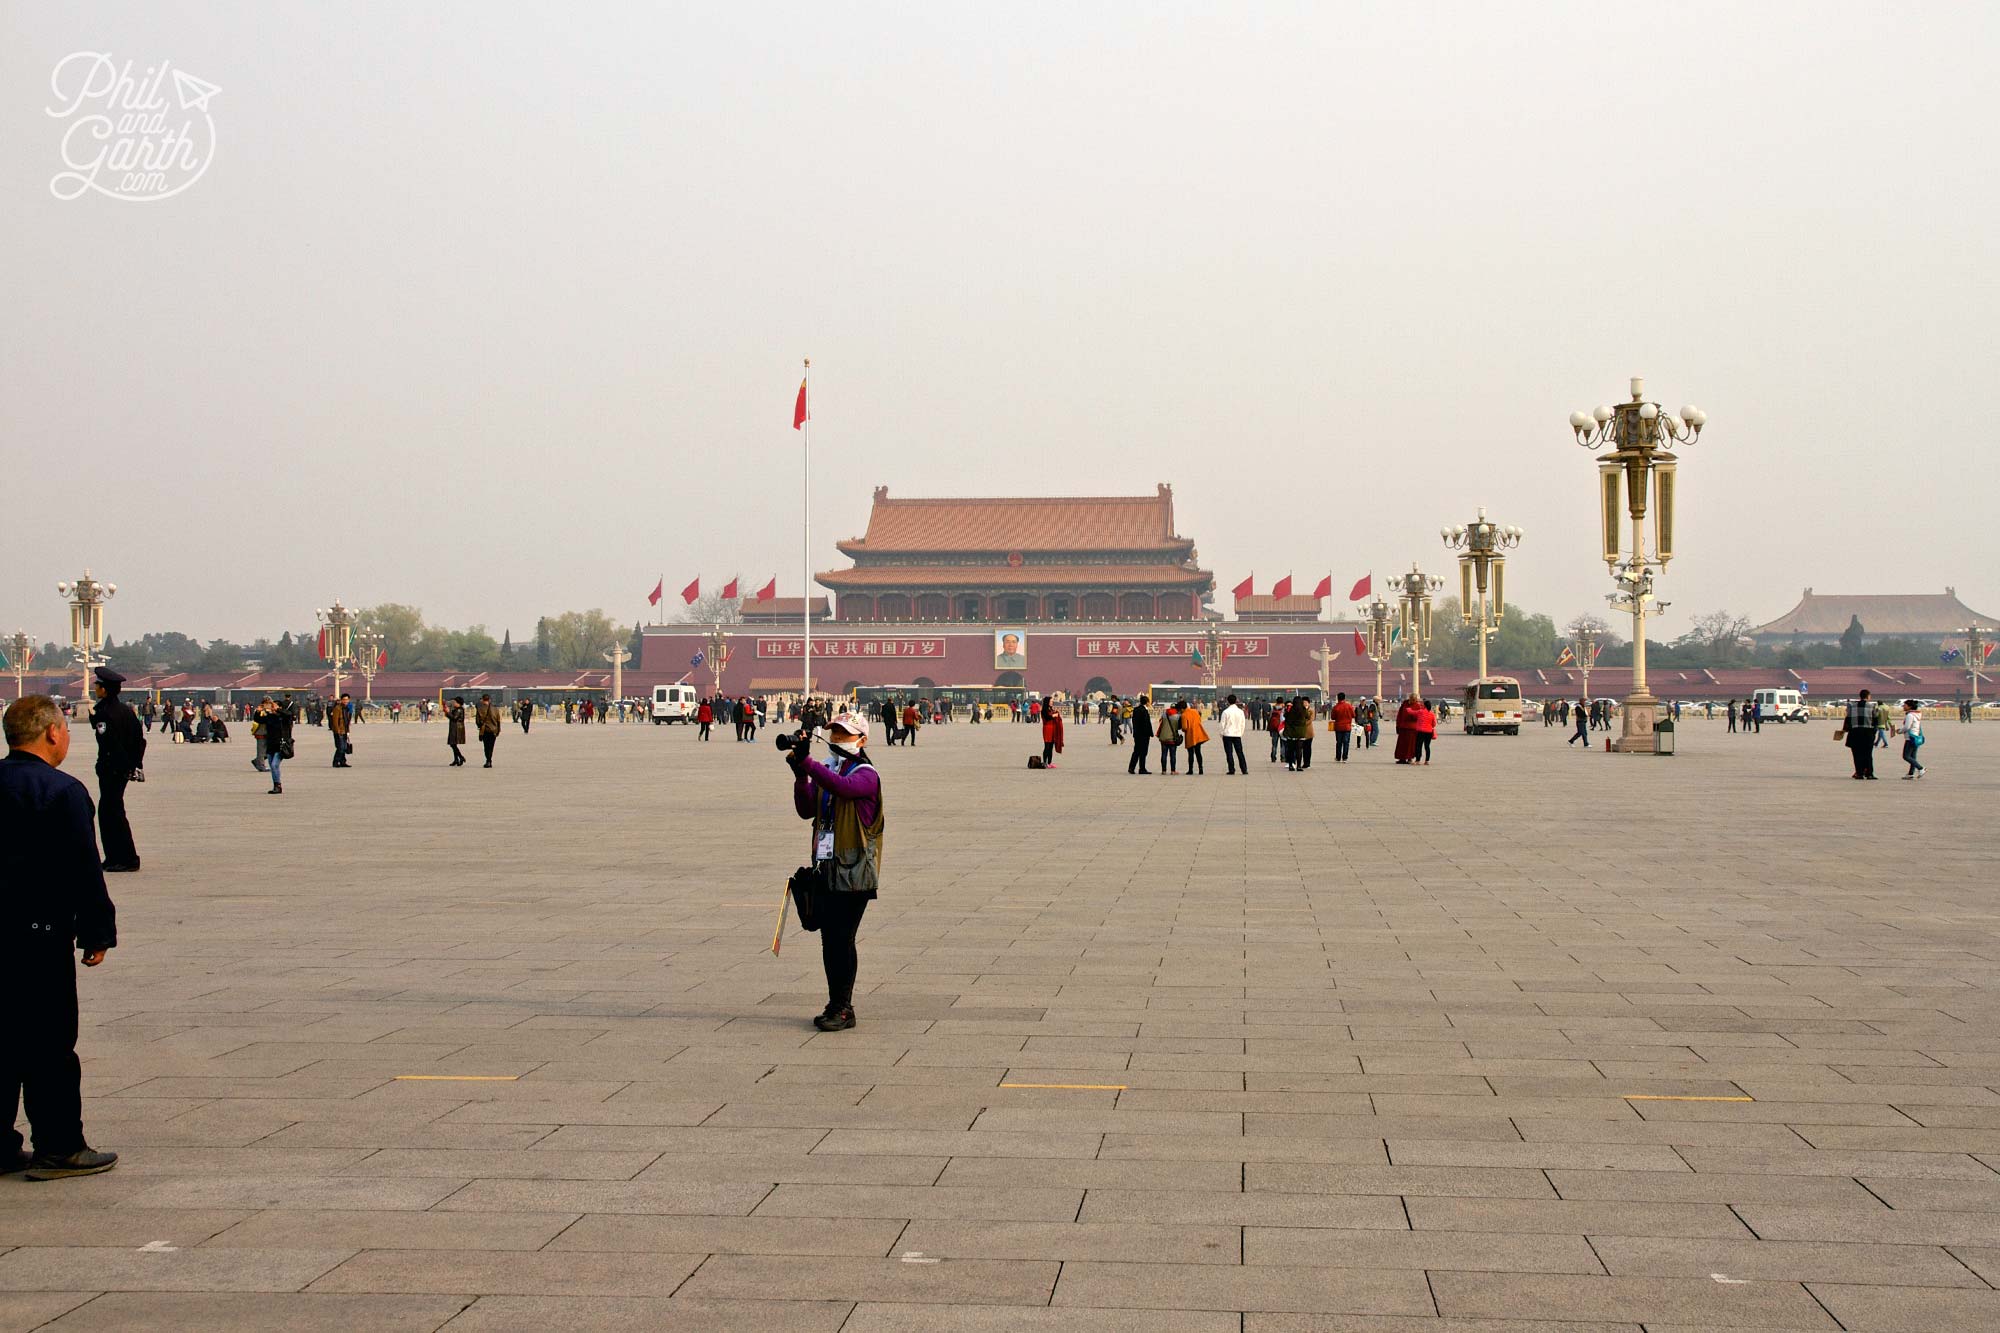 Beijing's Tiananmen Square is the largest city square in the world